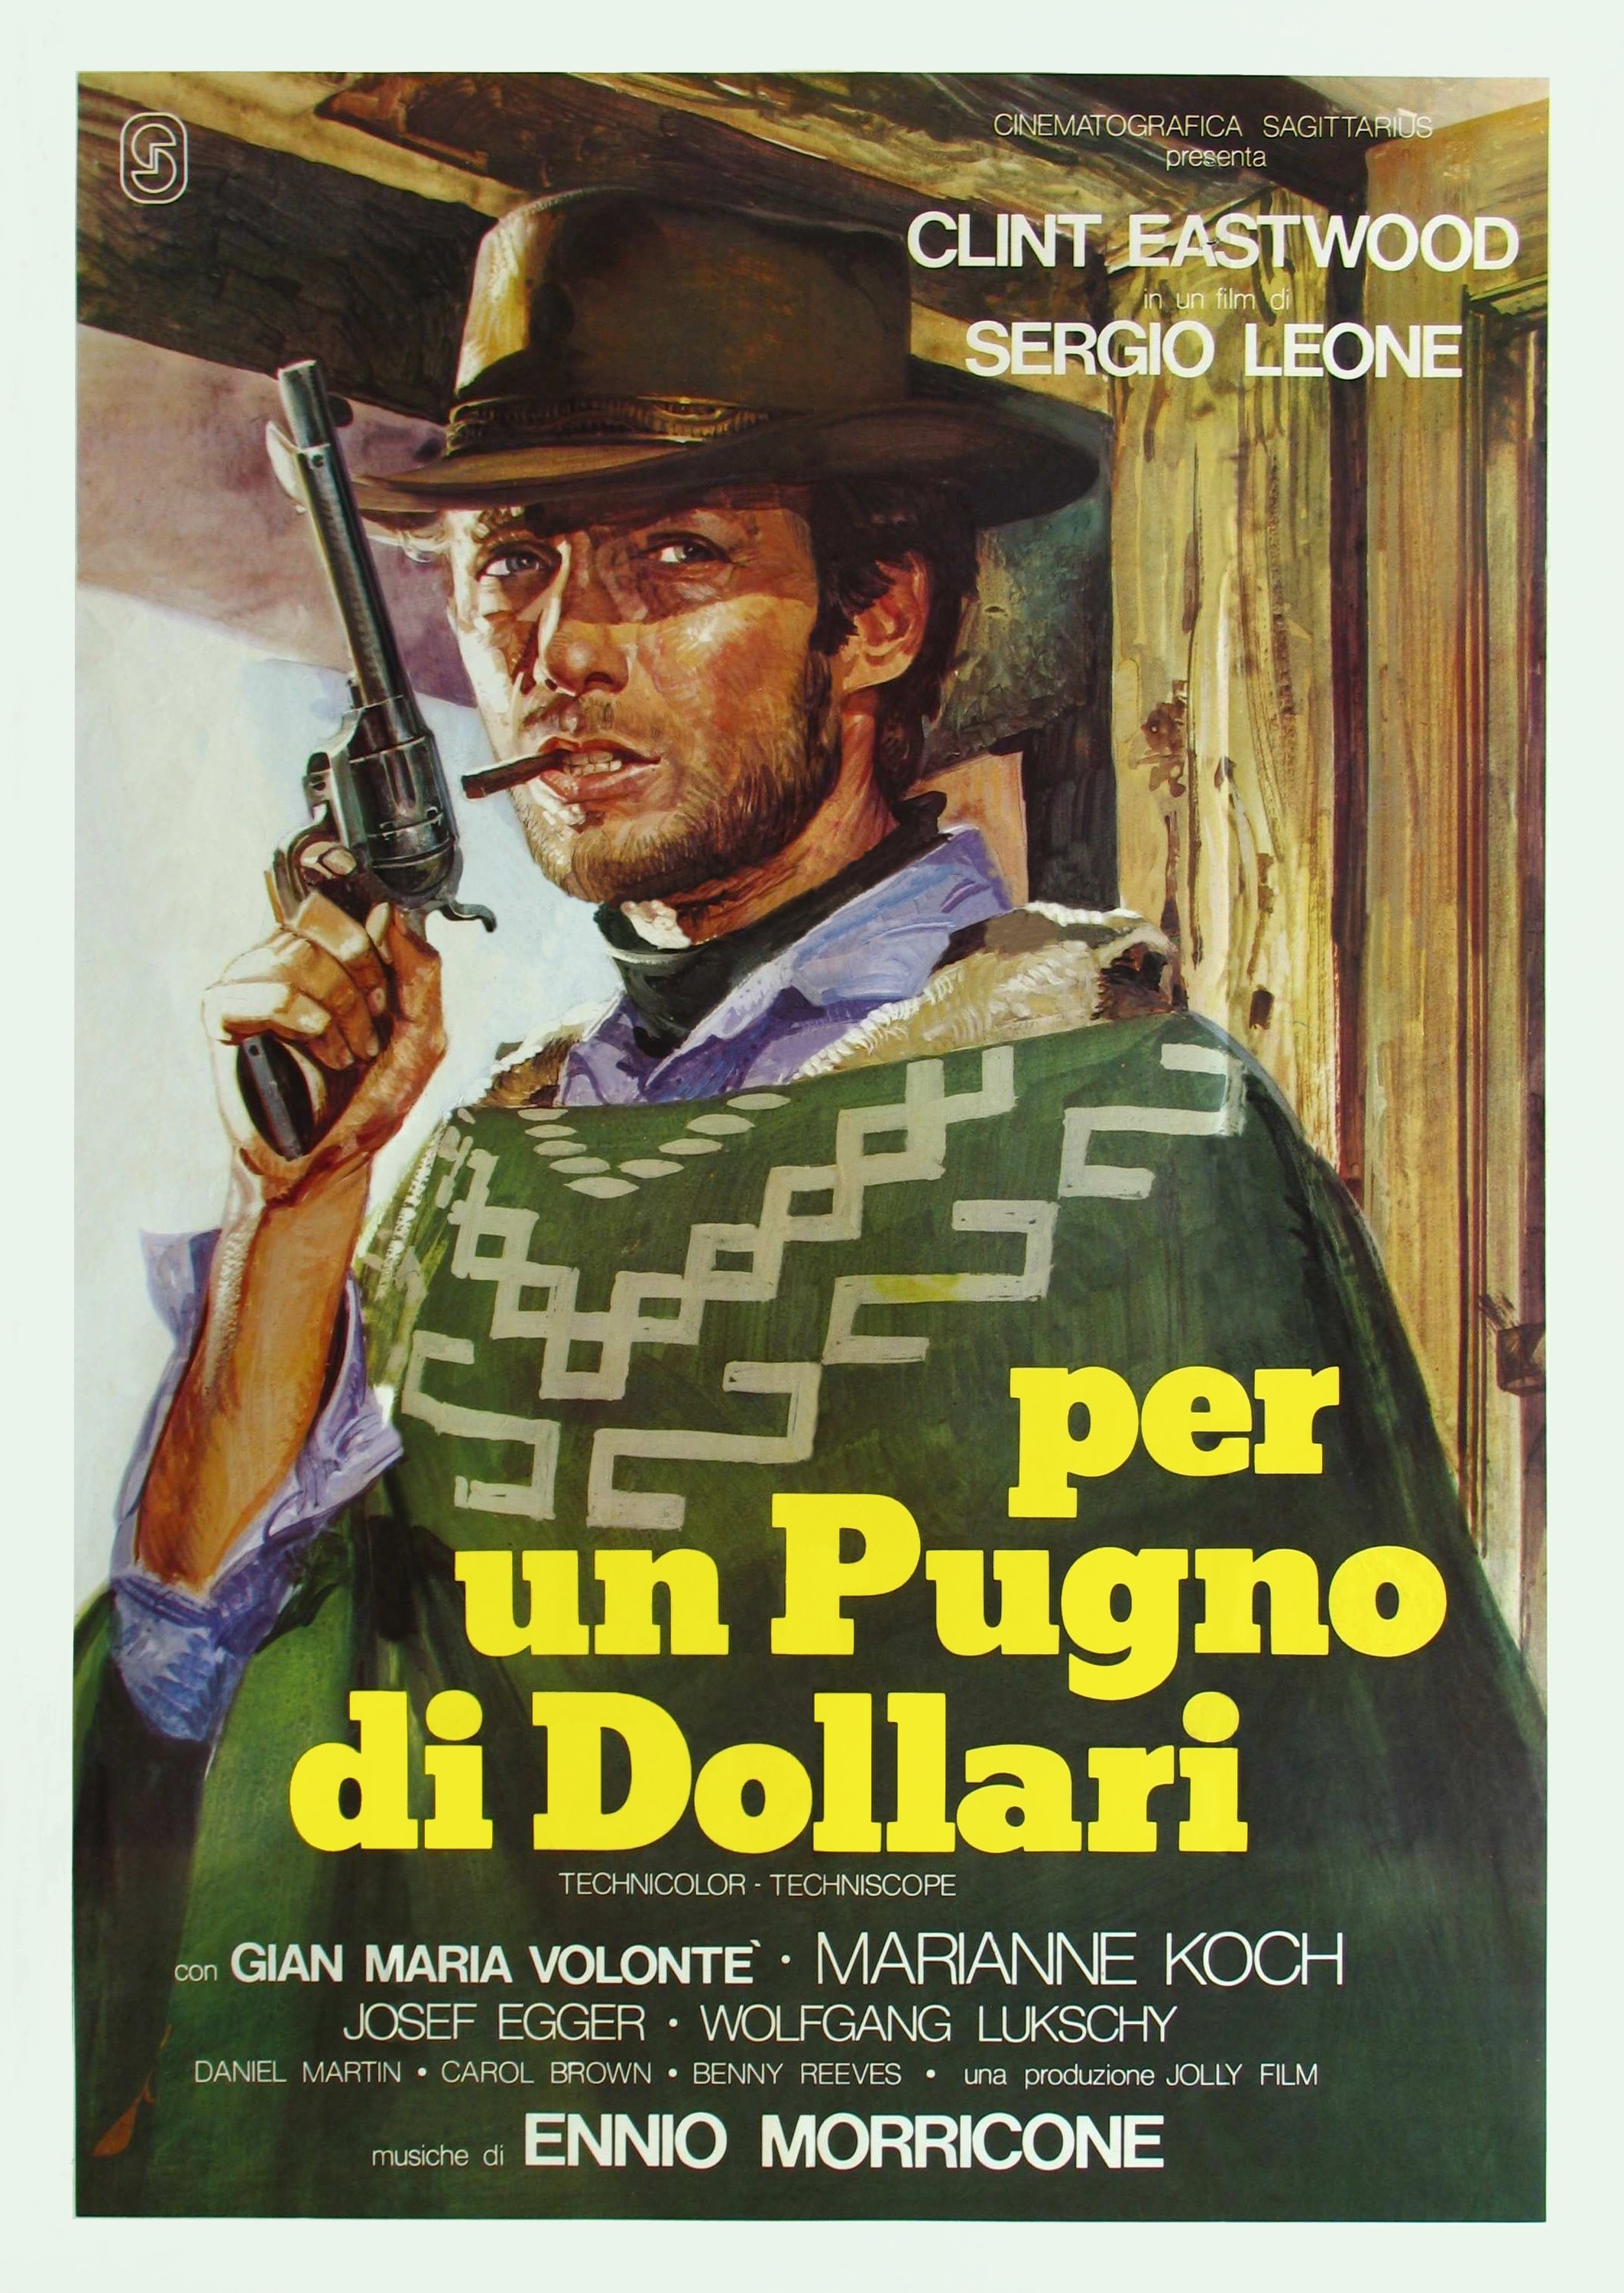 Fistful of Dollars movie poster